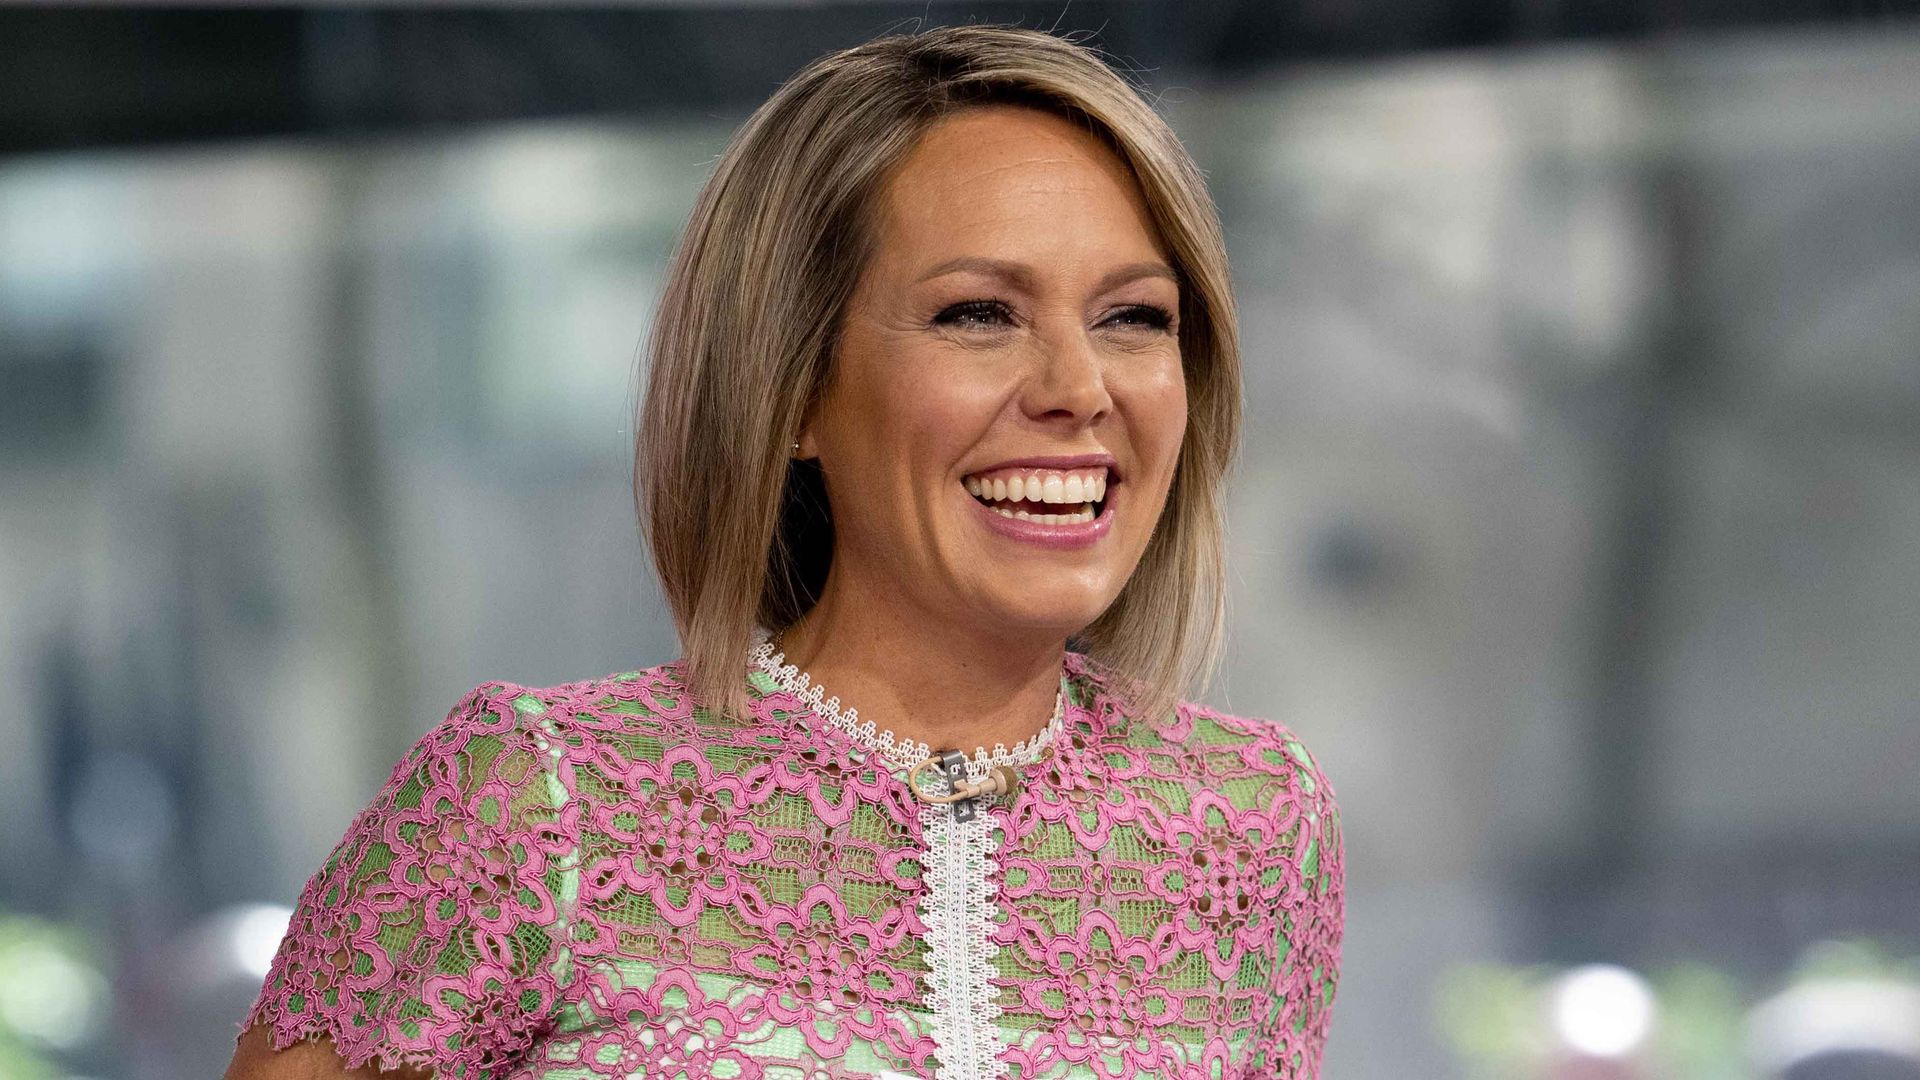 Dylan Dreyer hosting The Today Show